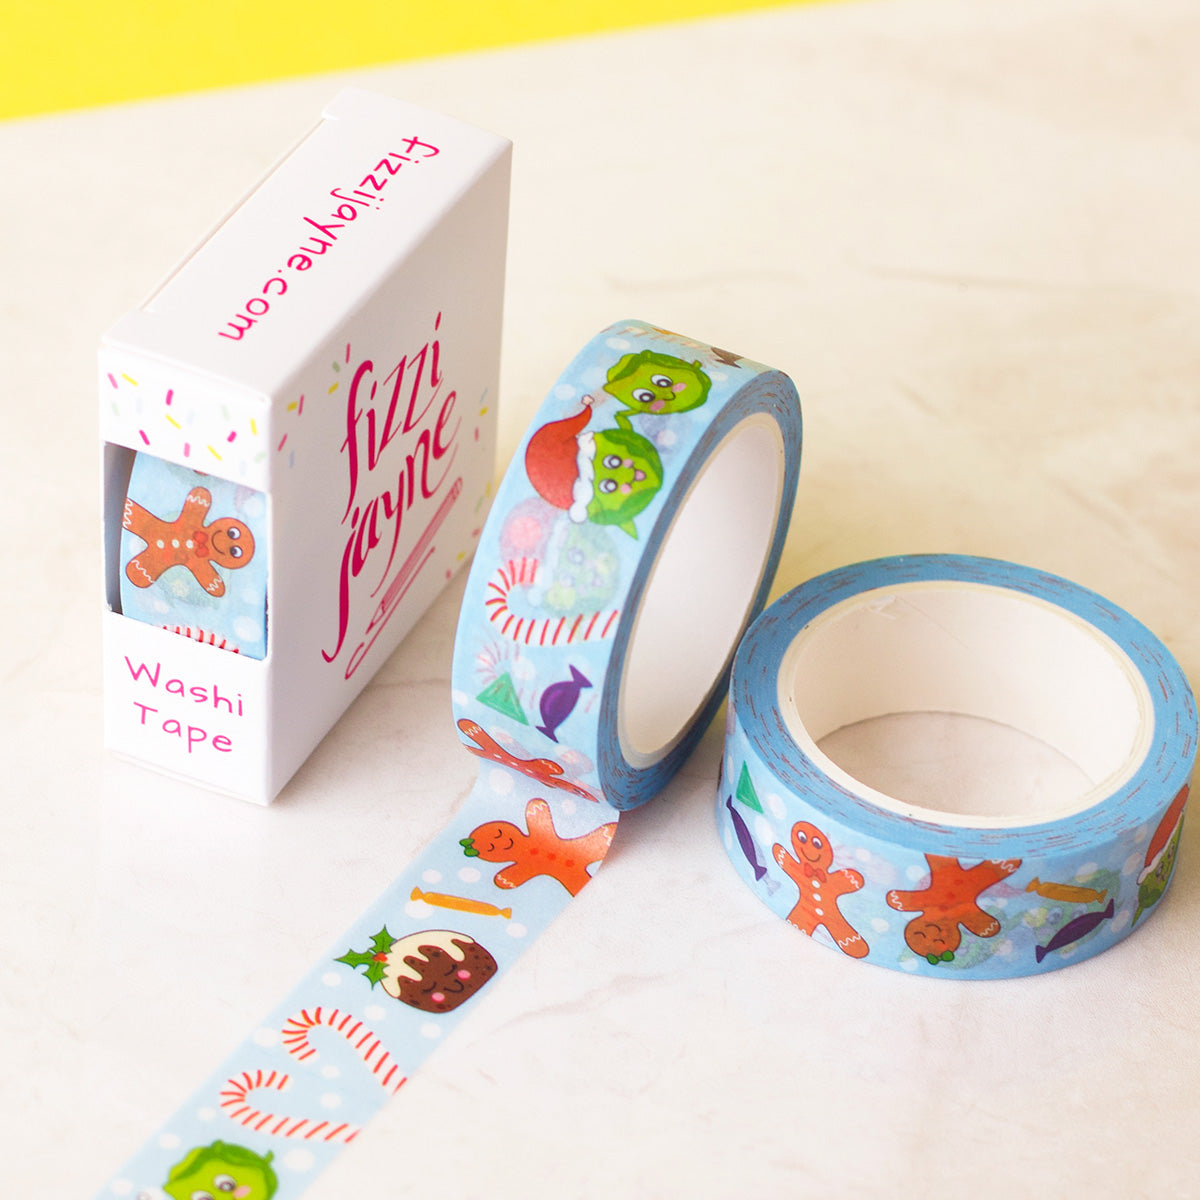 Cute Festive Food Characters Washi tape. Characters include Gingerbread man and woman, sprouts, one with a Santa hat, Christmas pudding on a blue background with white snowballs and candy canes and sweets. Tape is packaged in a box